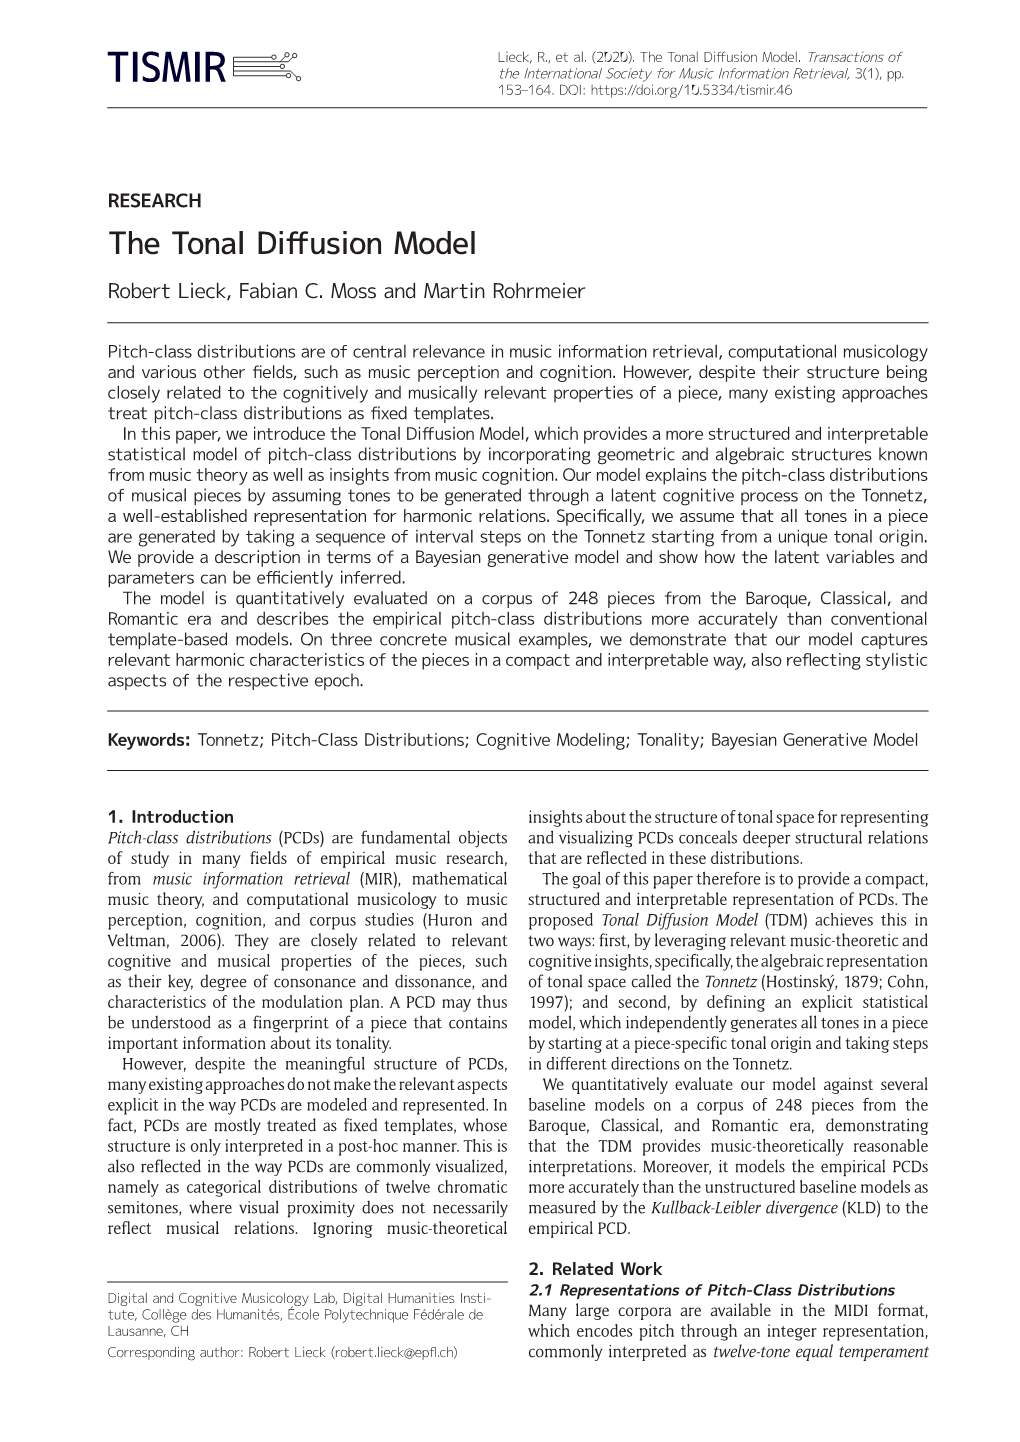 The Tonal Diffusion Model.Transactions of the International Society for Music Information Retrieval,3(1), Pp